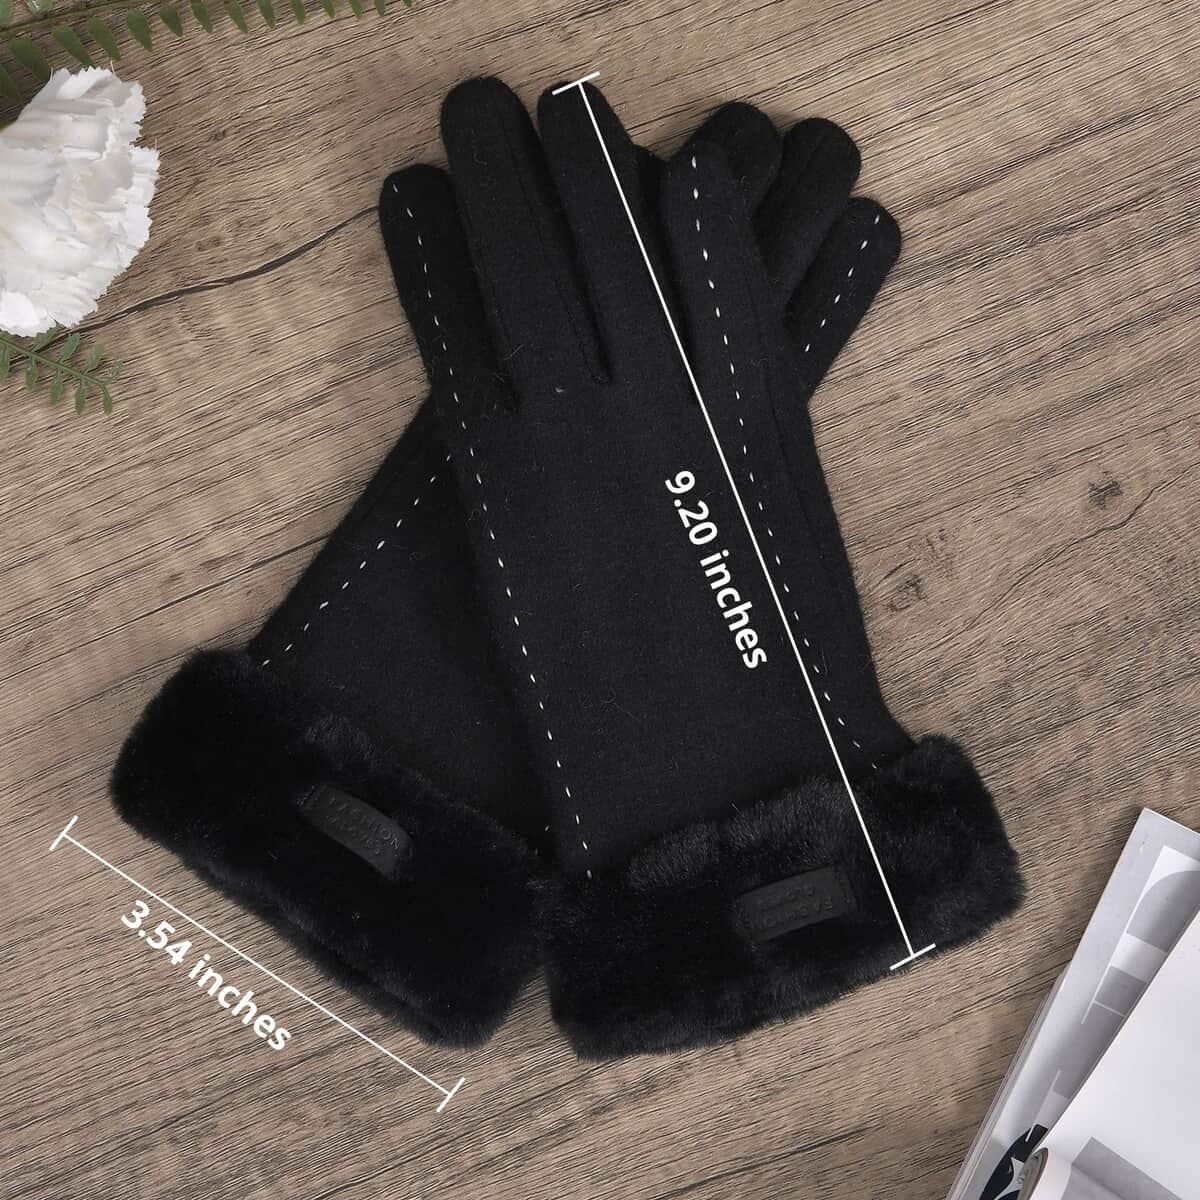 Black Cashmere Warm Gloves with Faux Fur and Equipped Touch Screen Friendly (9.2"x3.54") image number 4